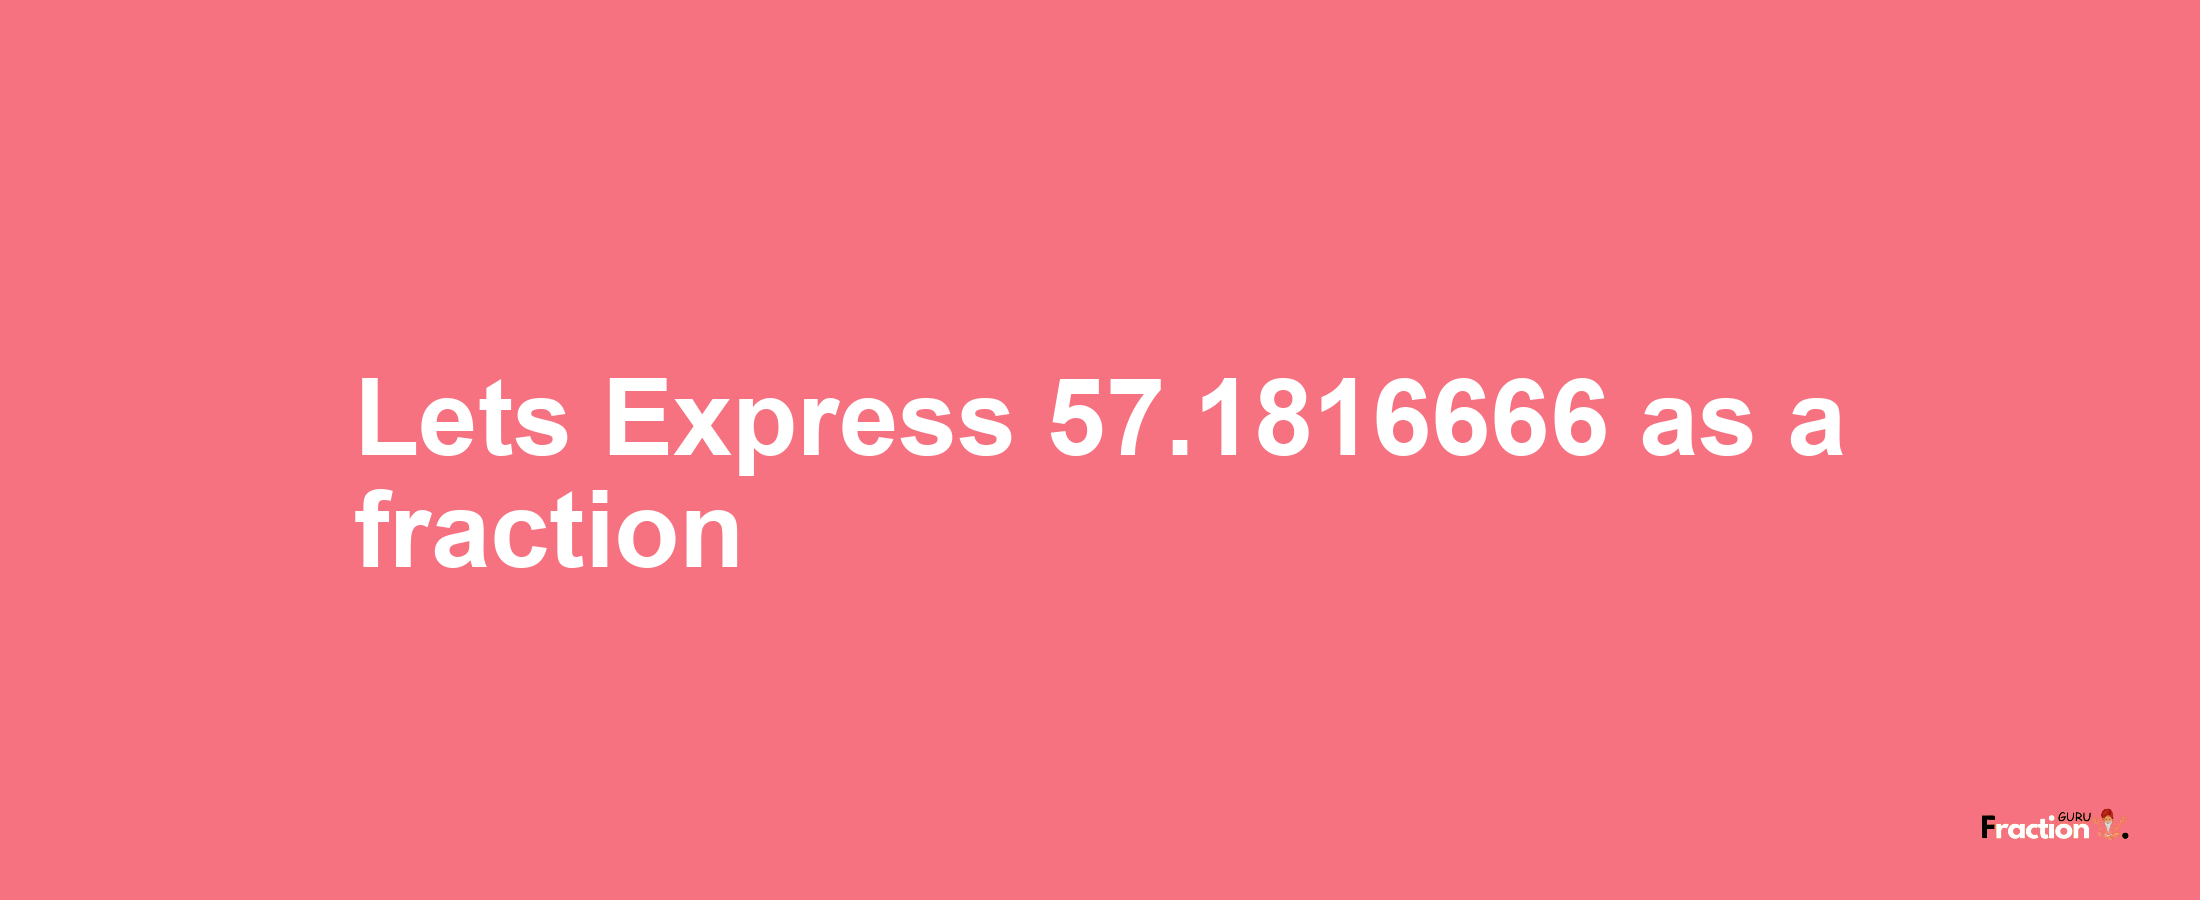 Lets Express 57.1816666 as afraction